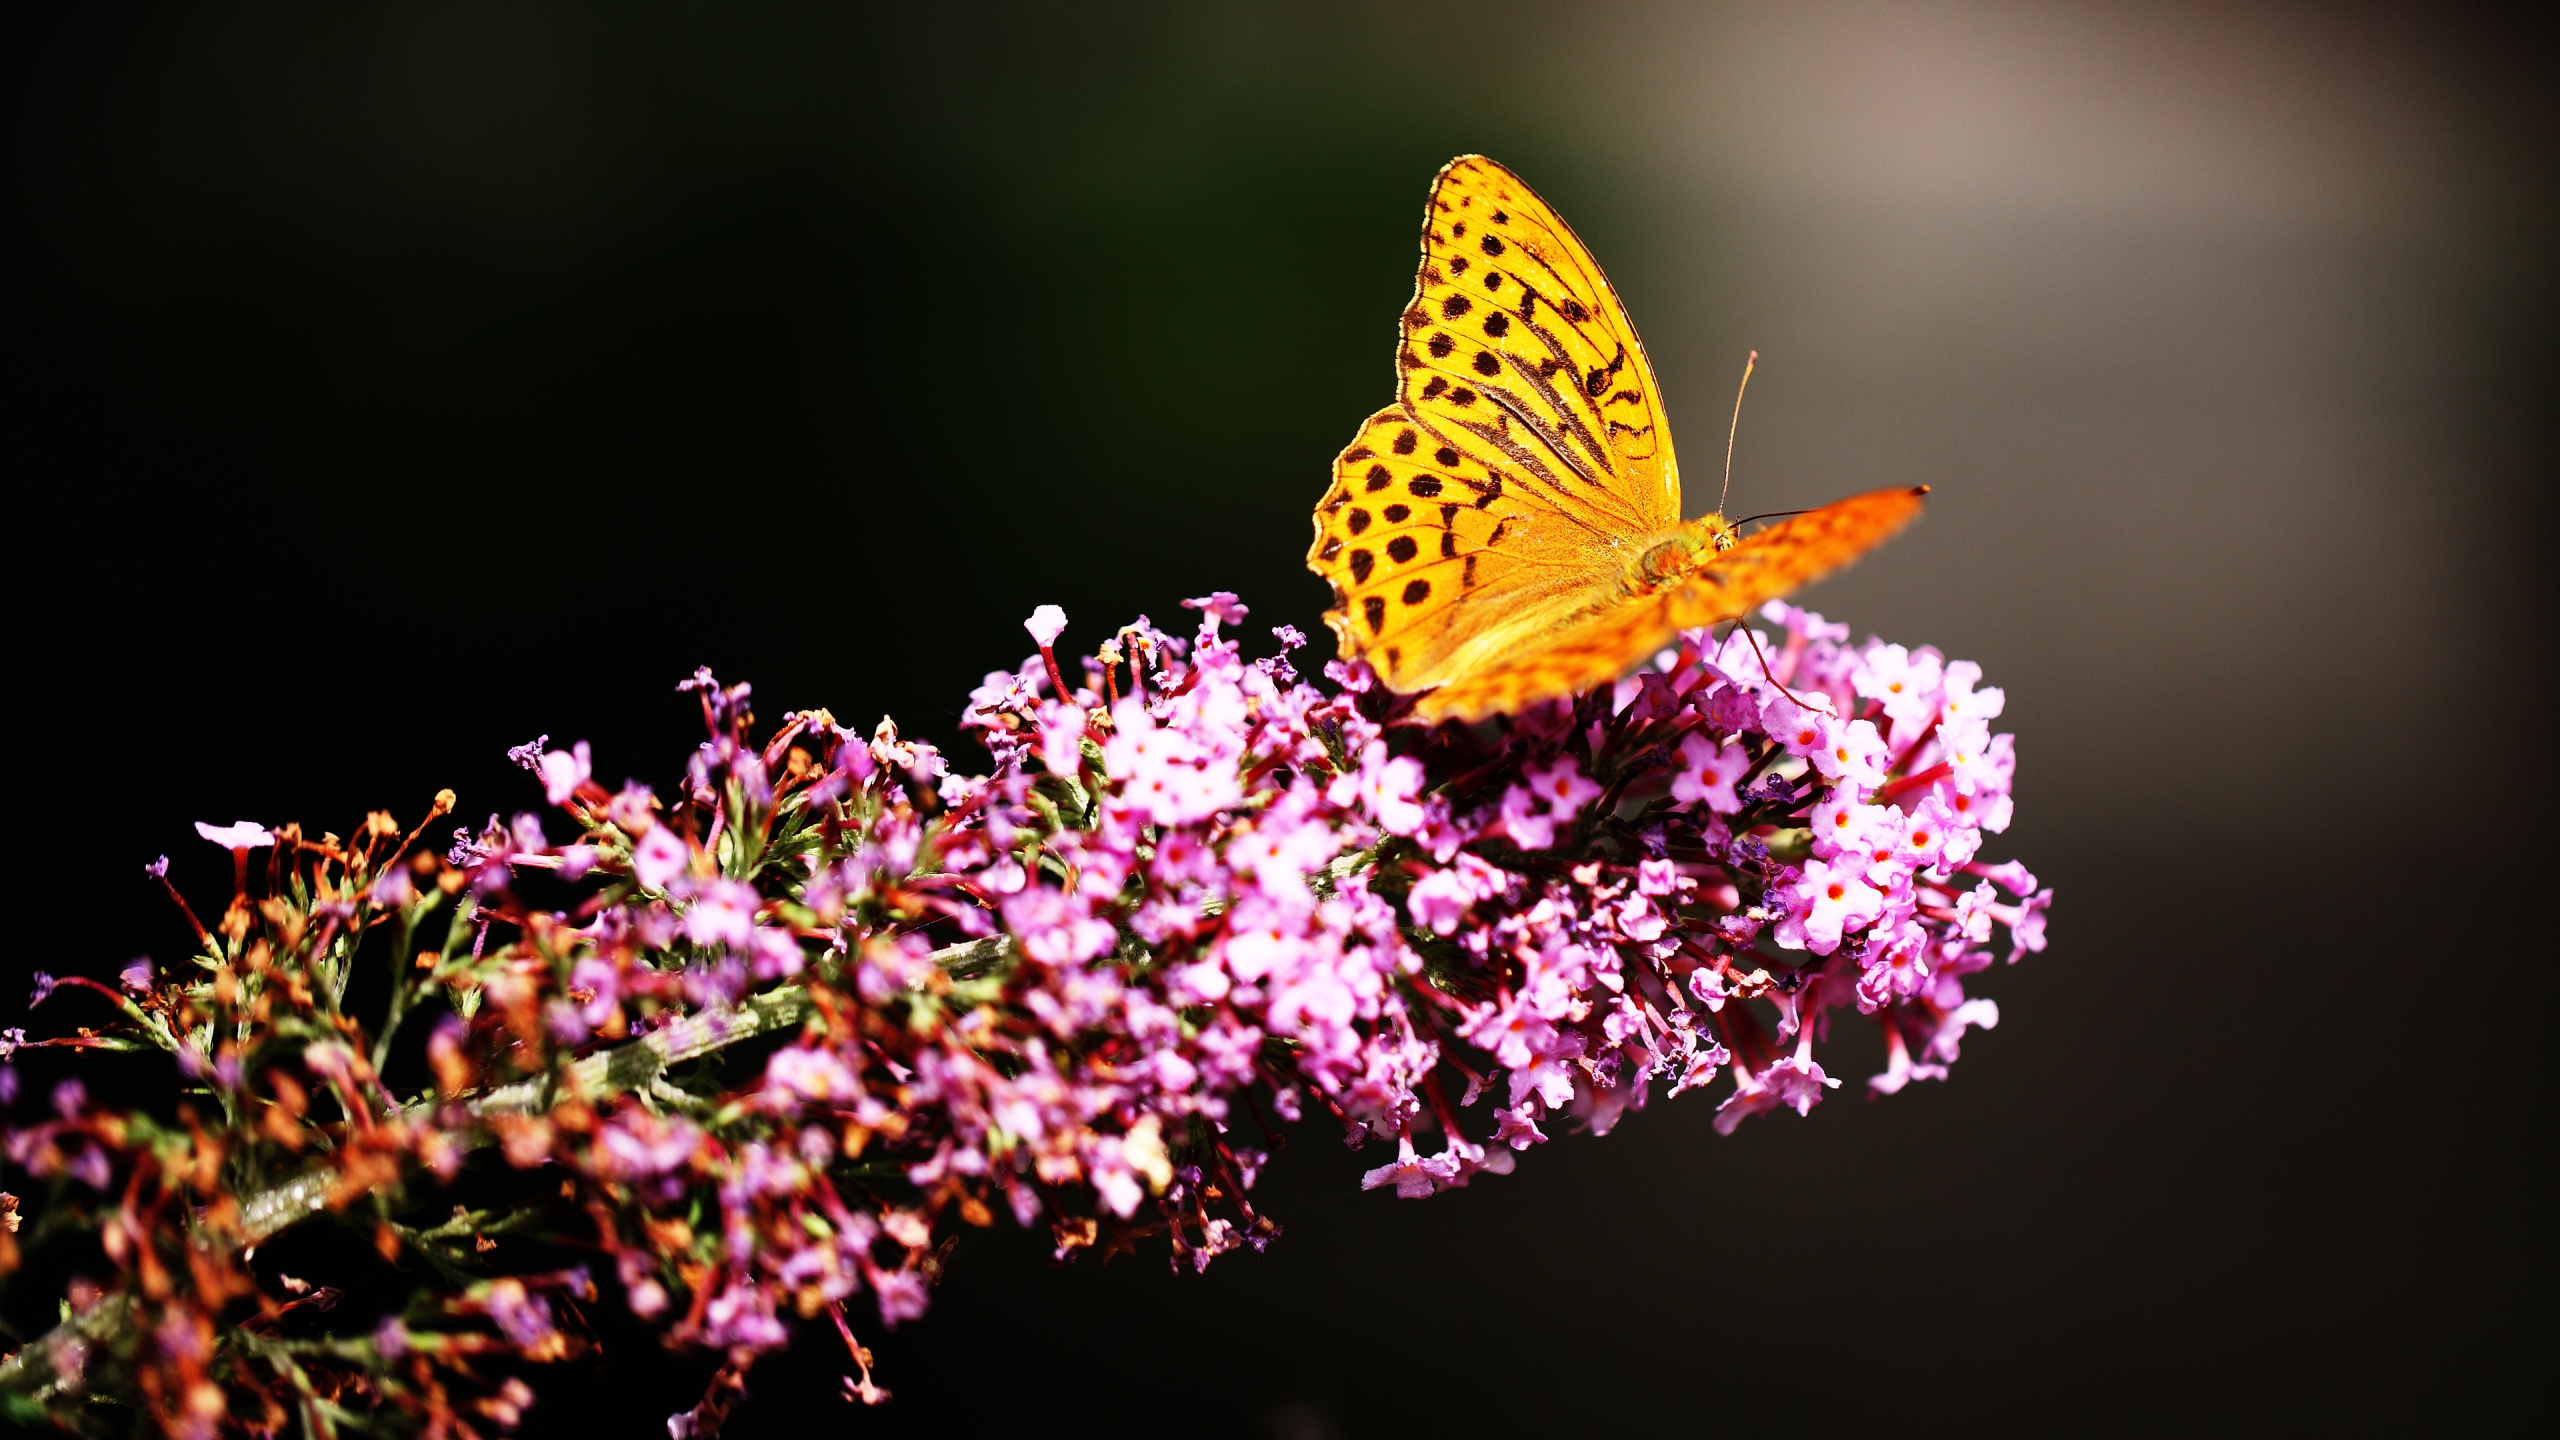 Butterfly Tenderness Nature wallpaper  TOP Free wallpapers